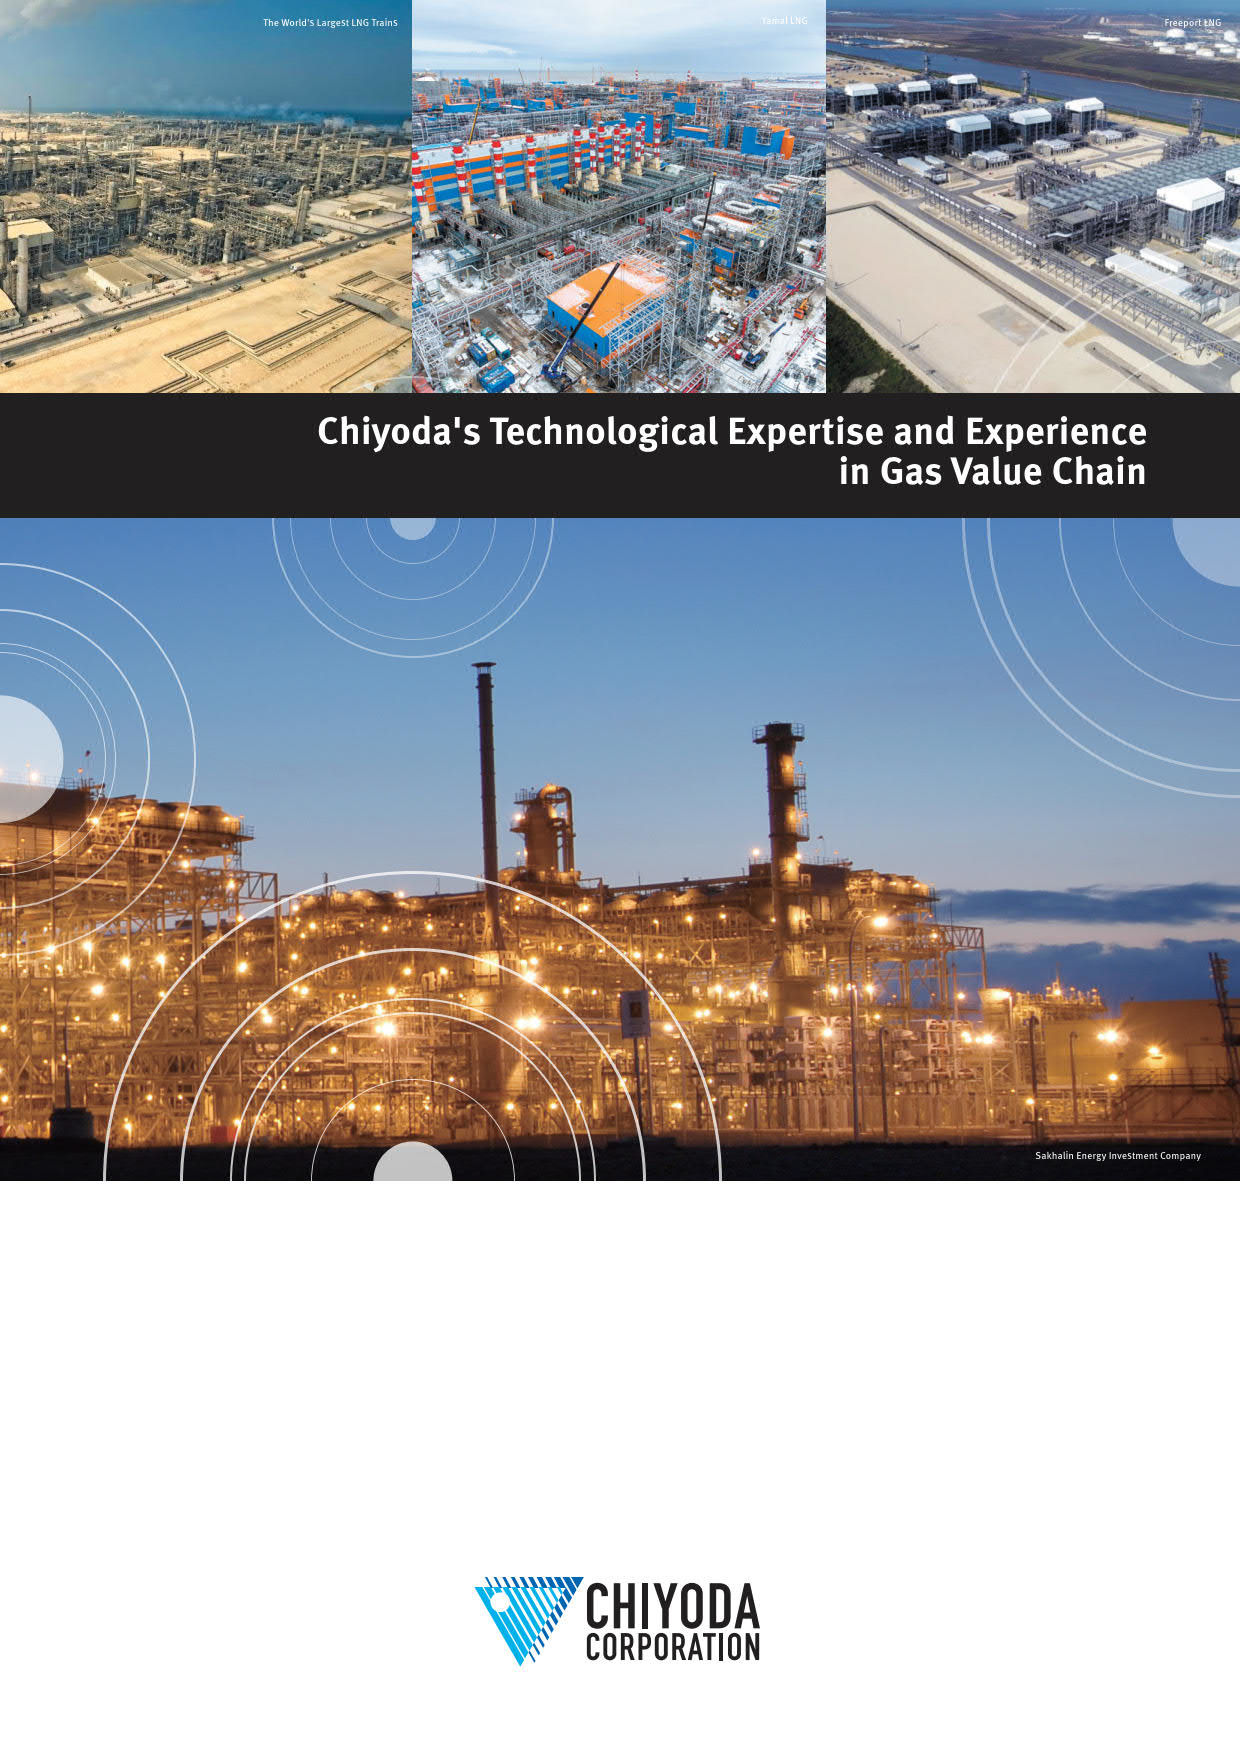 Chiyoda's Technological Expertise and Experience in Gas Value Chain (英語のみ)